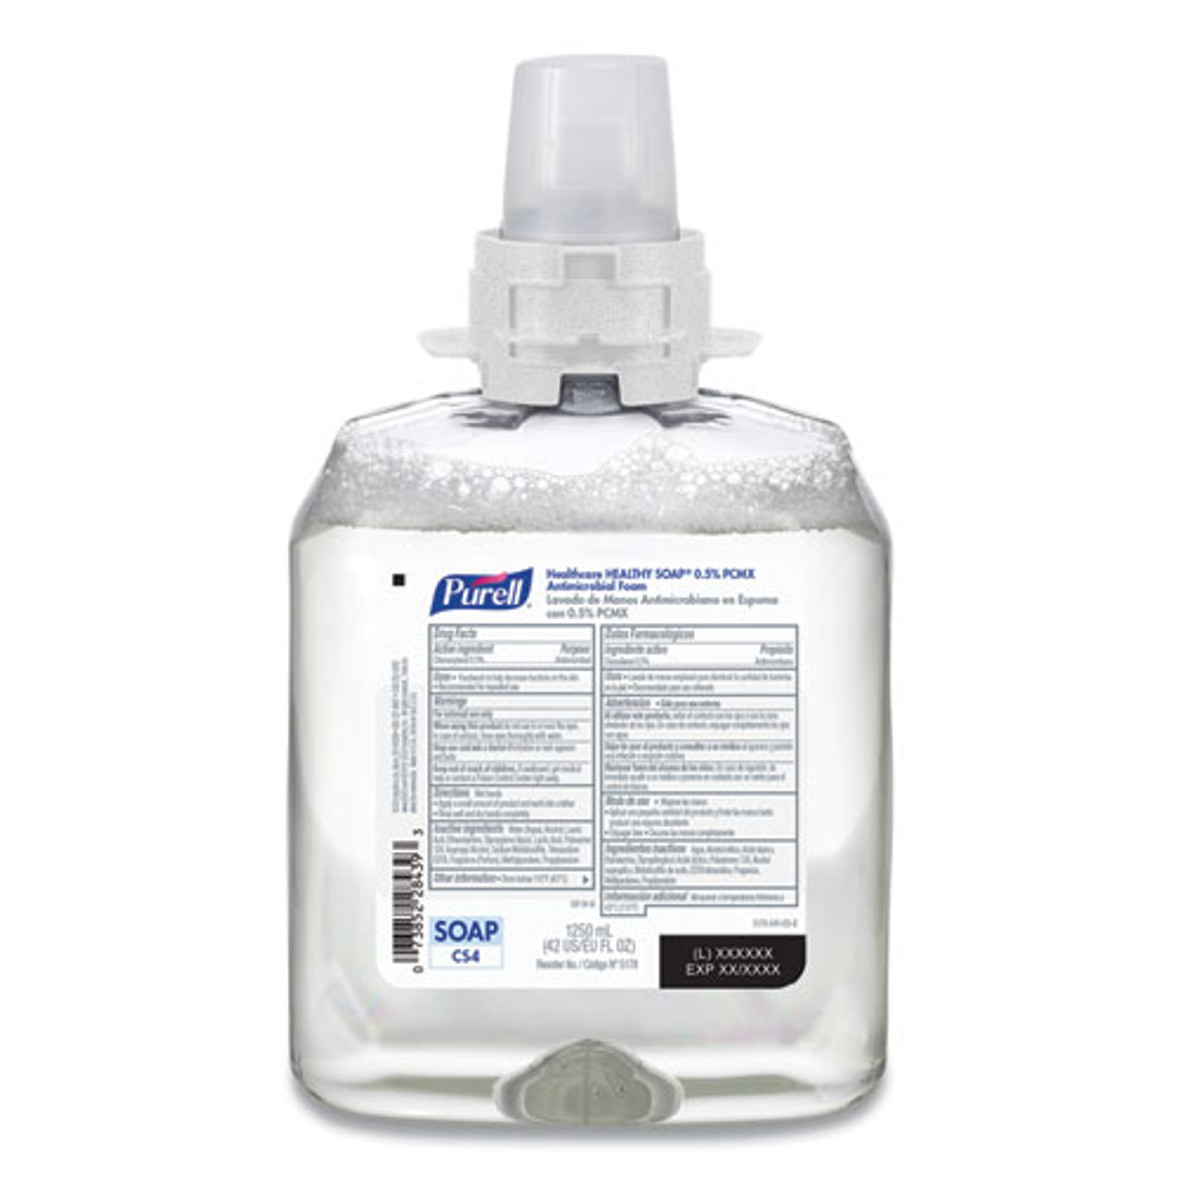 PURELL® Healthcare HEALTHY SOAP 0.5% PCMX Antimicrobial Foam, For CS4 Dispensers